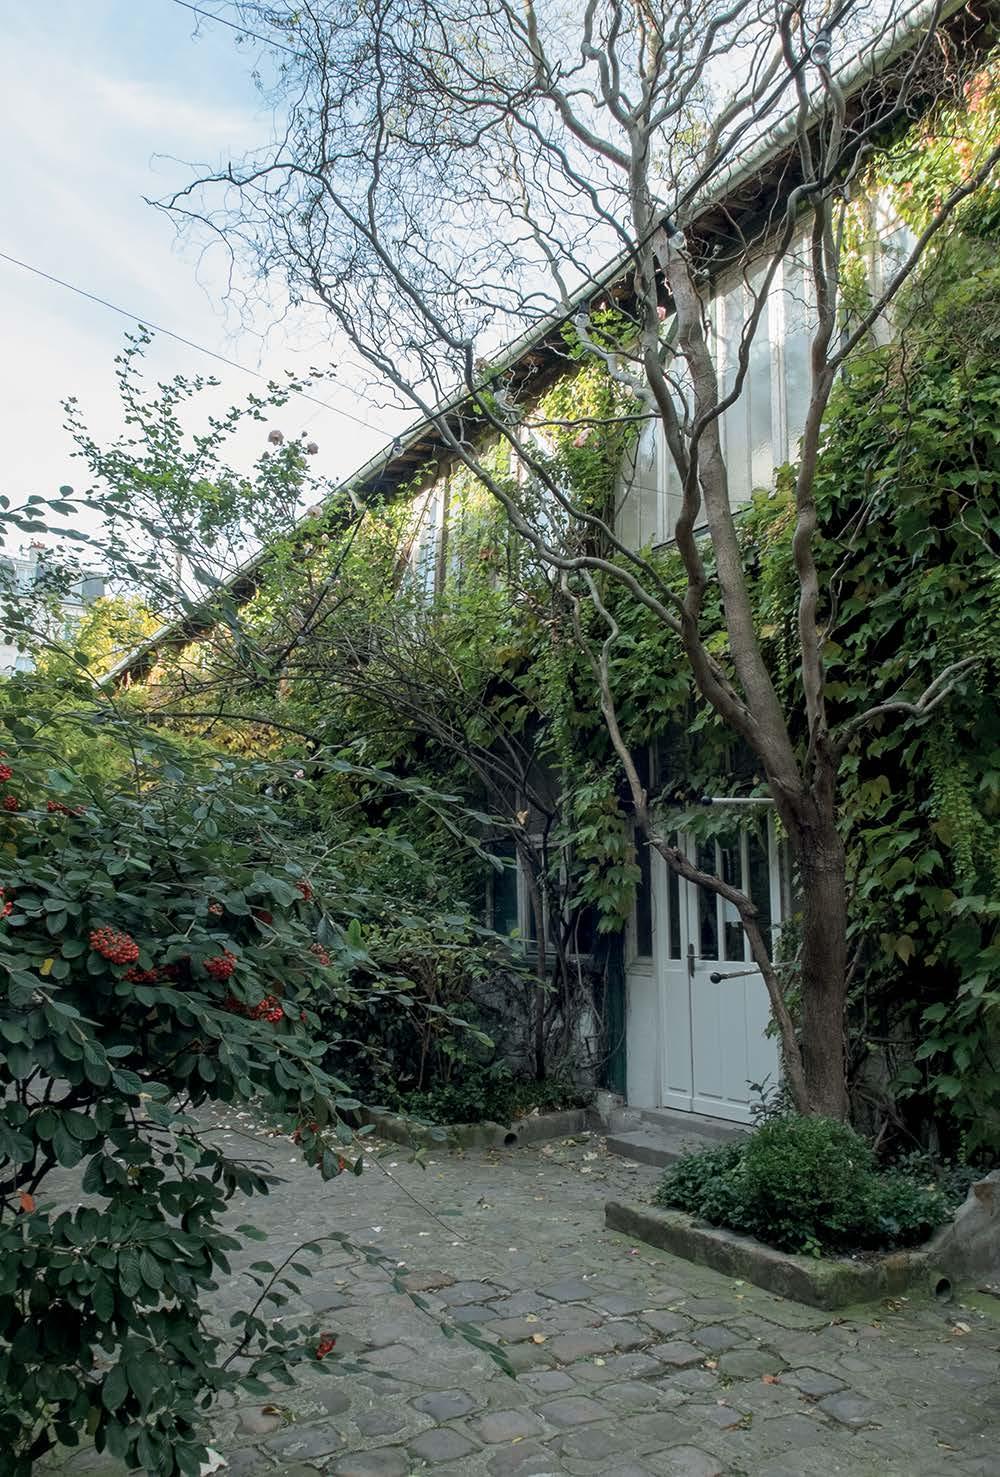 VILLA VASSILIEFF - PERNOD RICARD FELLOWSHIP & BÉTONSALON - CENTER FOR ART AND RESEARCH Villa Vassilieff intends to reconnect with the history of its location by inviting artists and researchers to